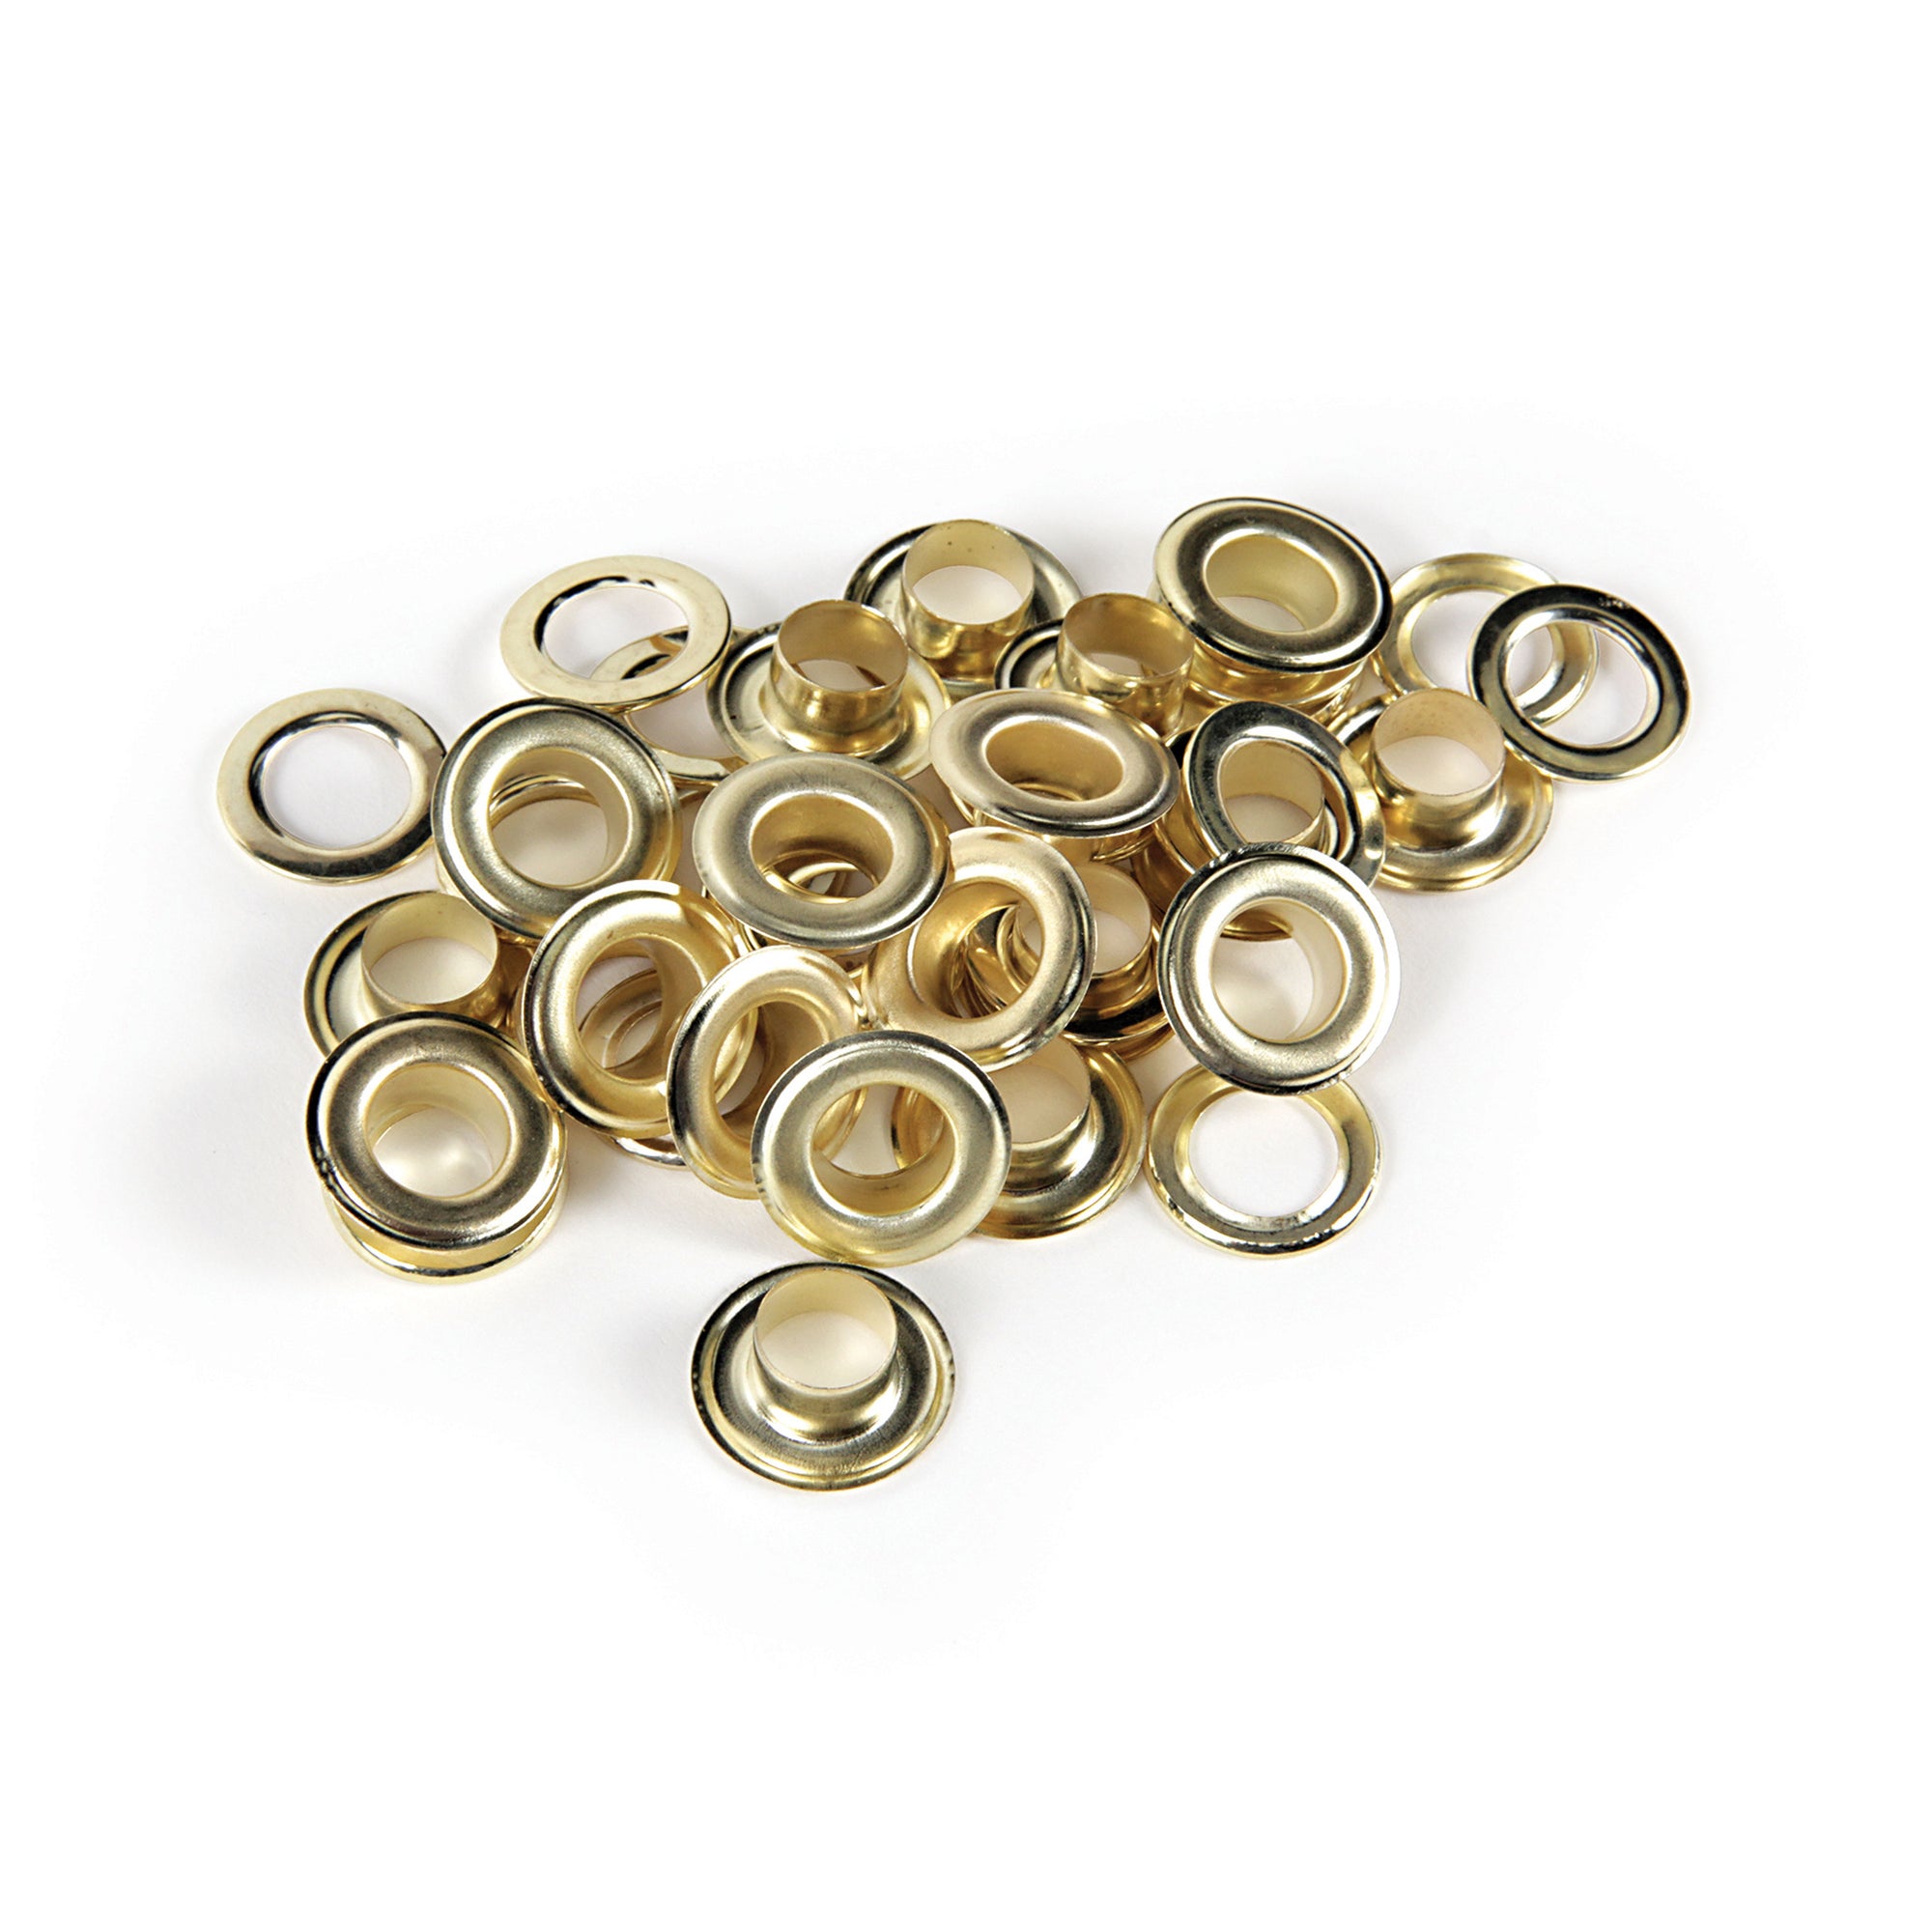 Camco 51328 Metal Grommets